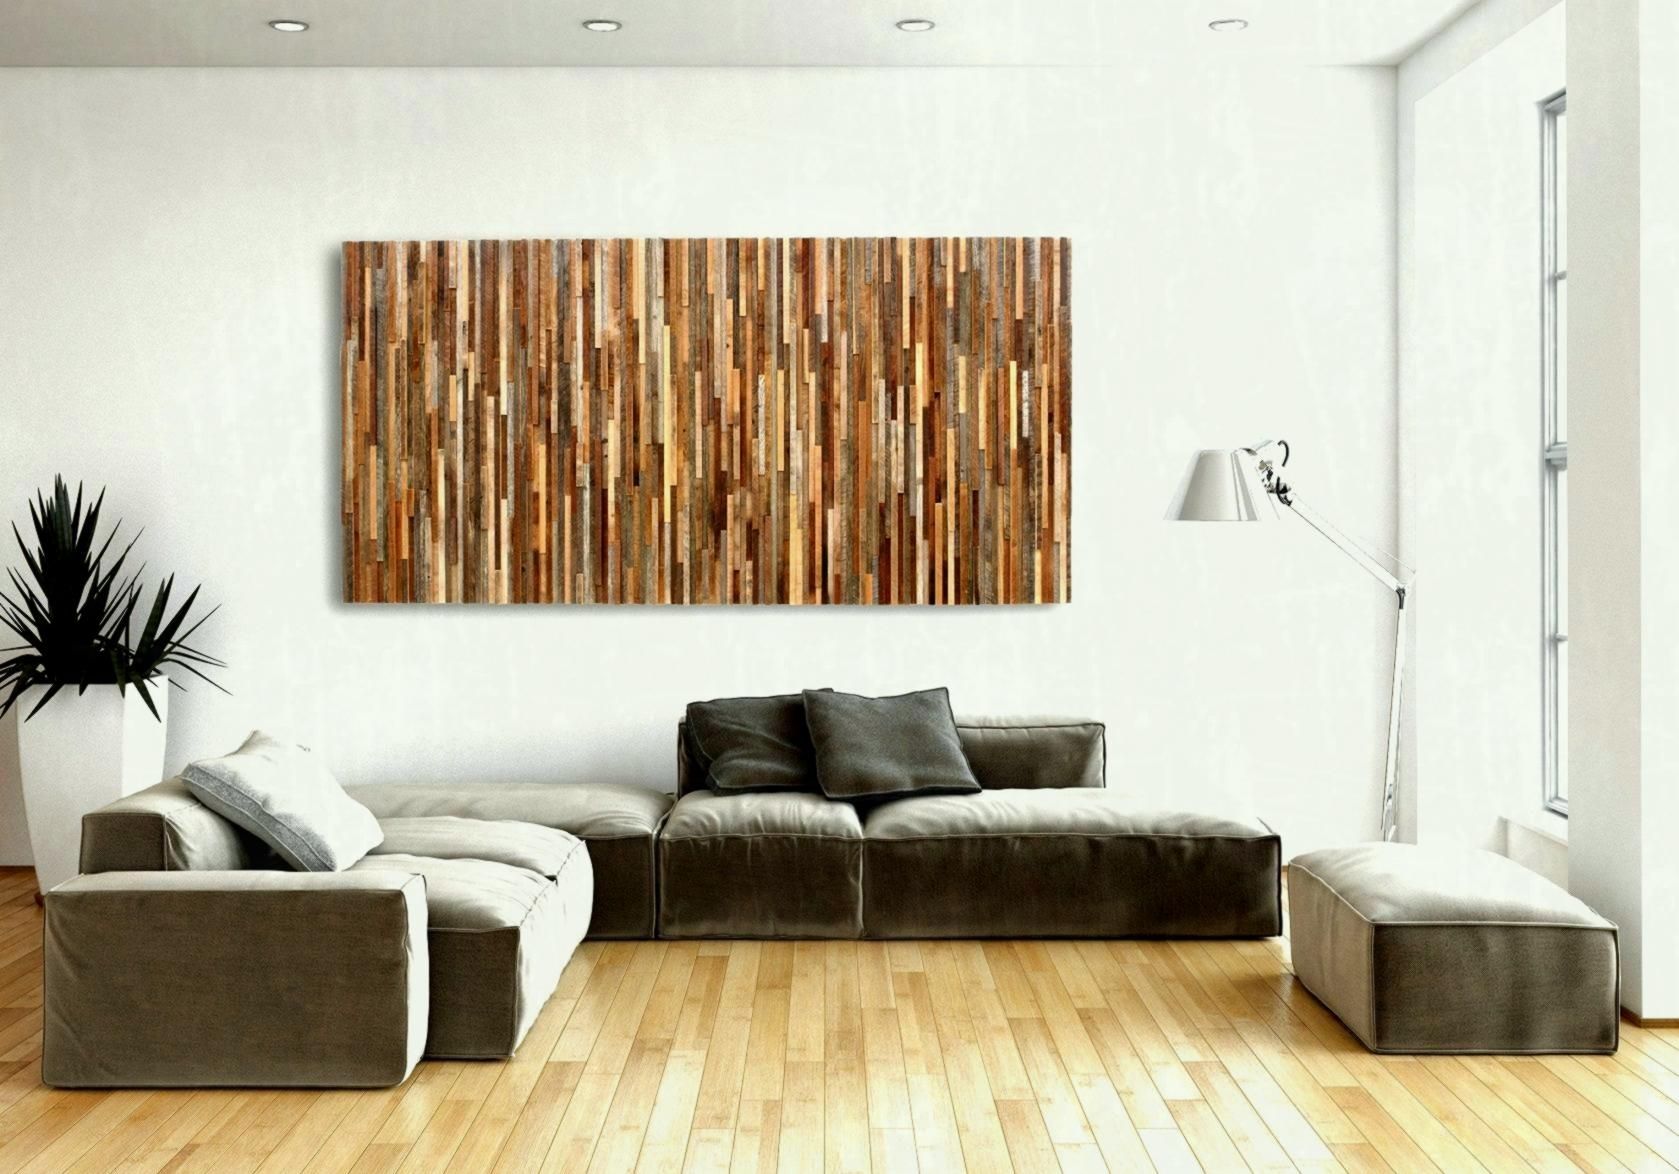 Wood Pallet Wall Art Photo Unique Ideas And Designs Gallery Inside Pallet Wall Art (Photo 16 of 20)